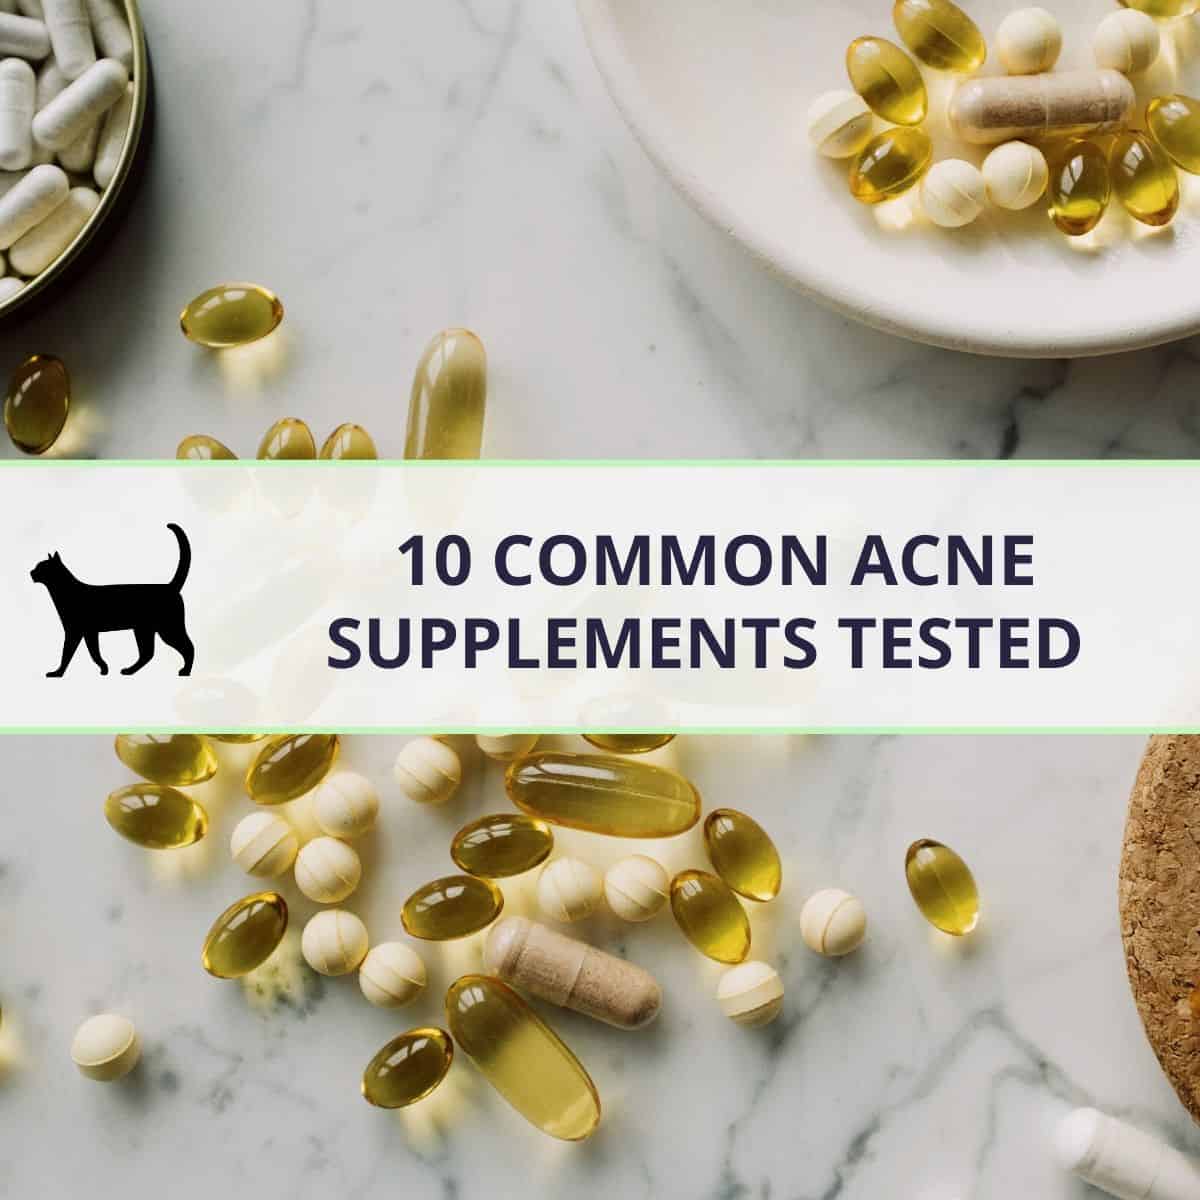 Popular supplements for hormonal acne tested